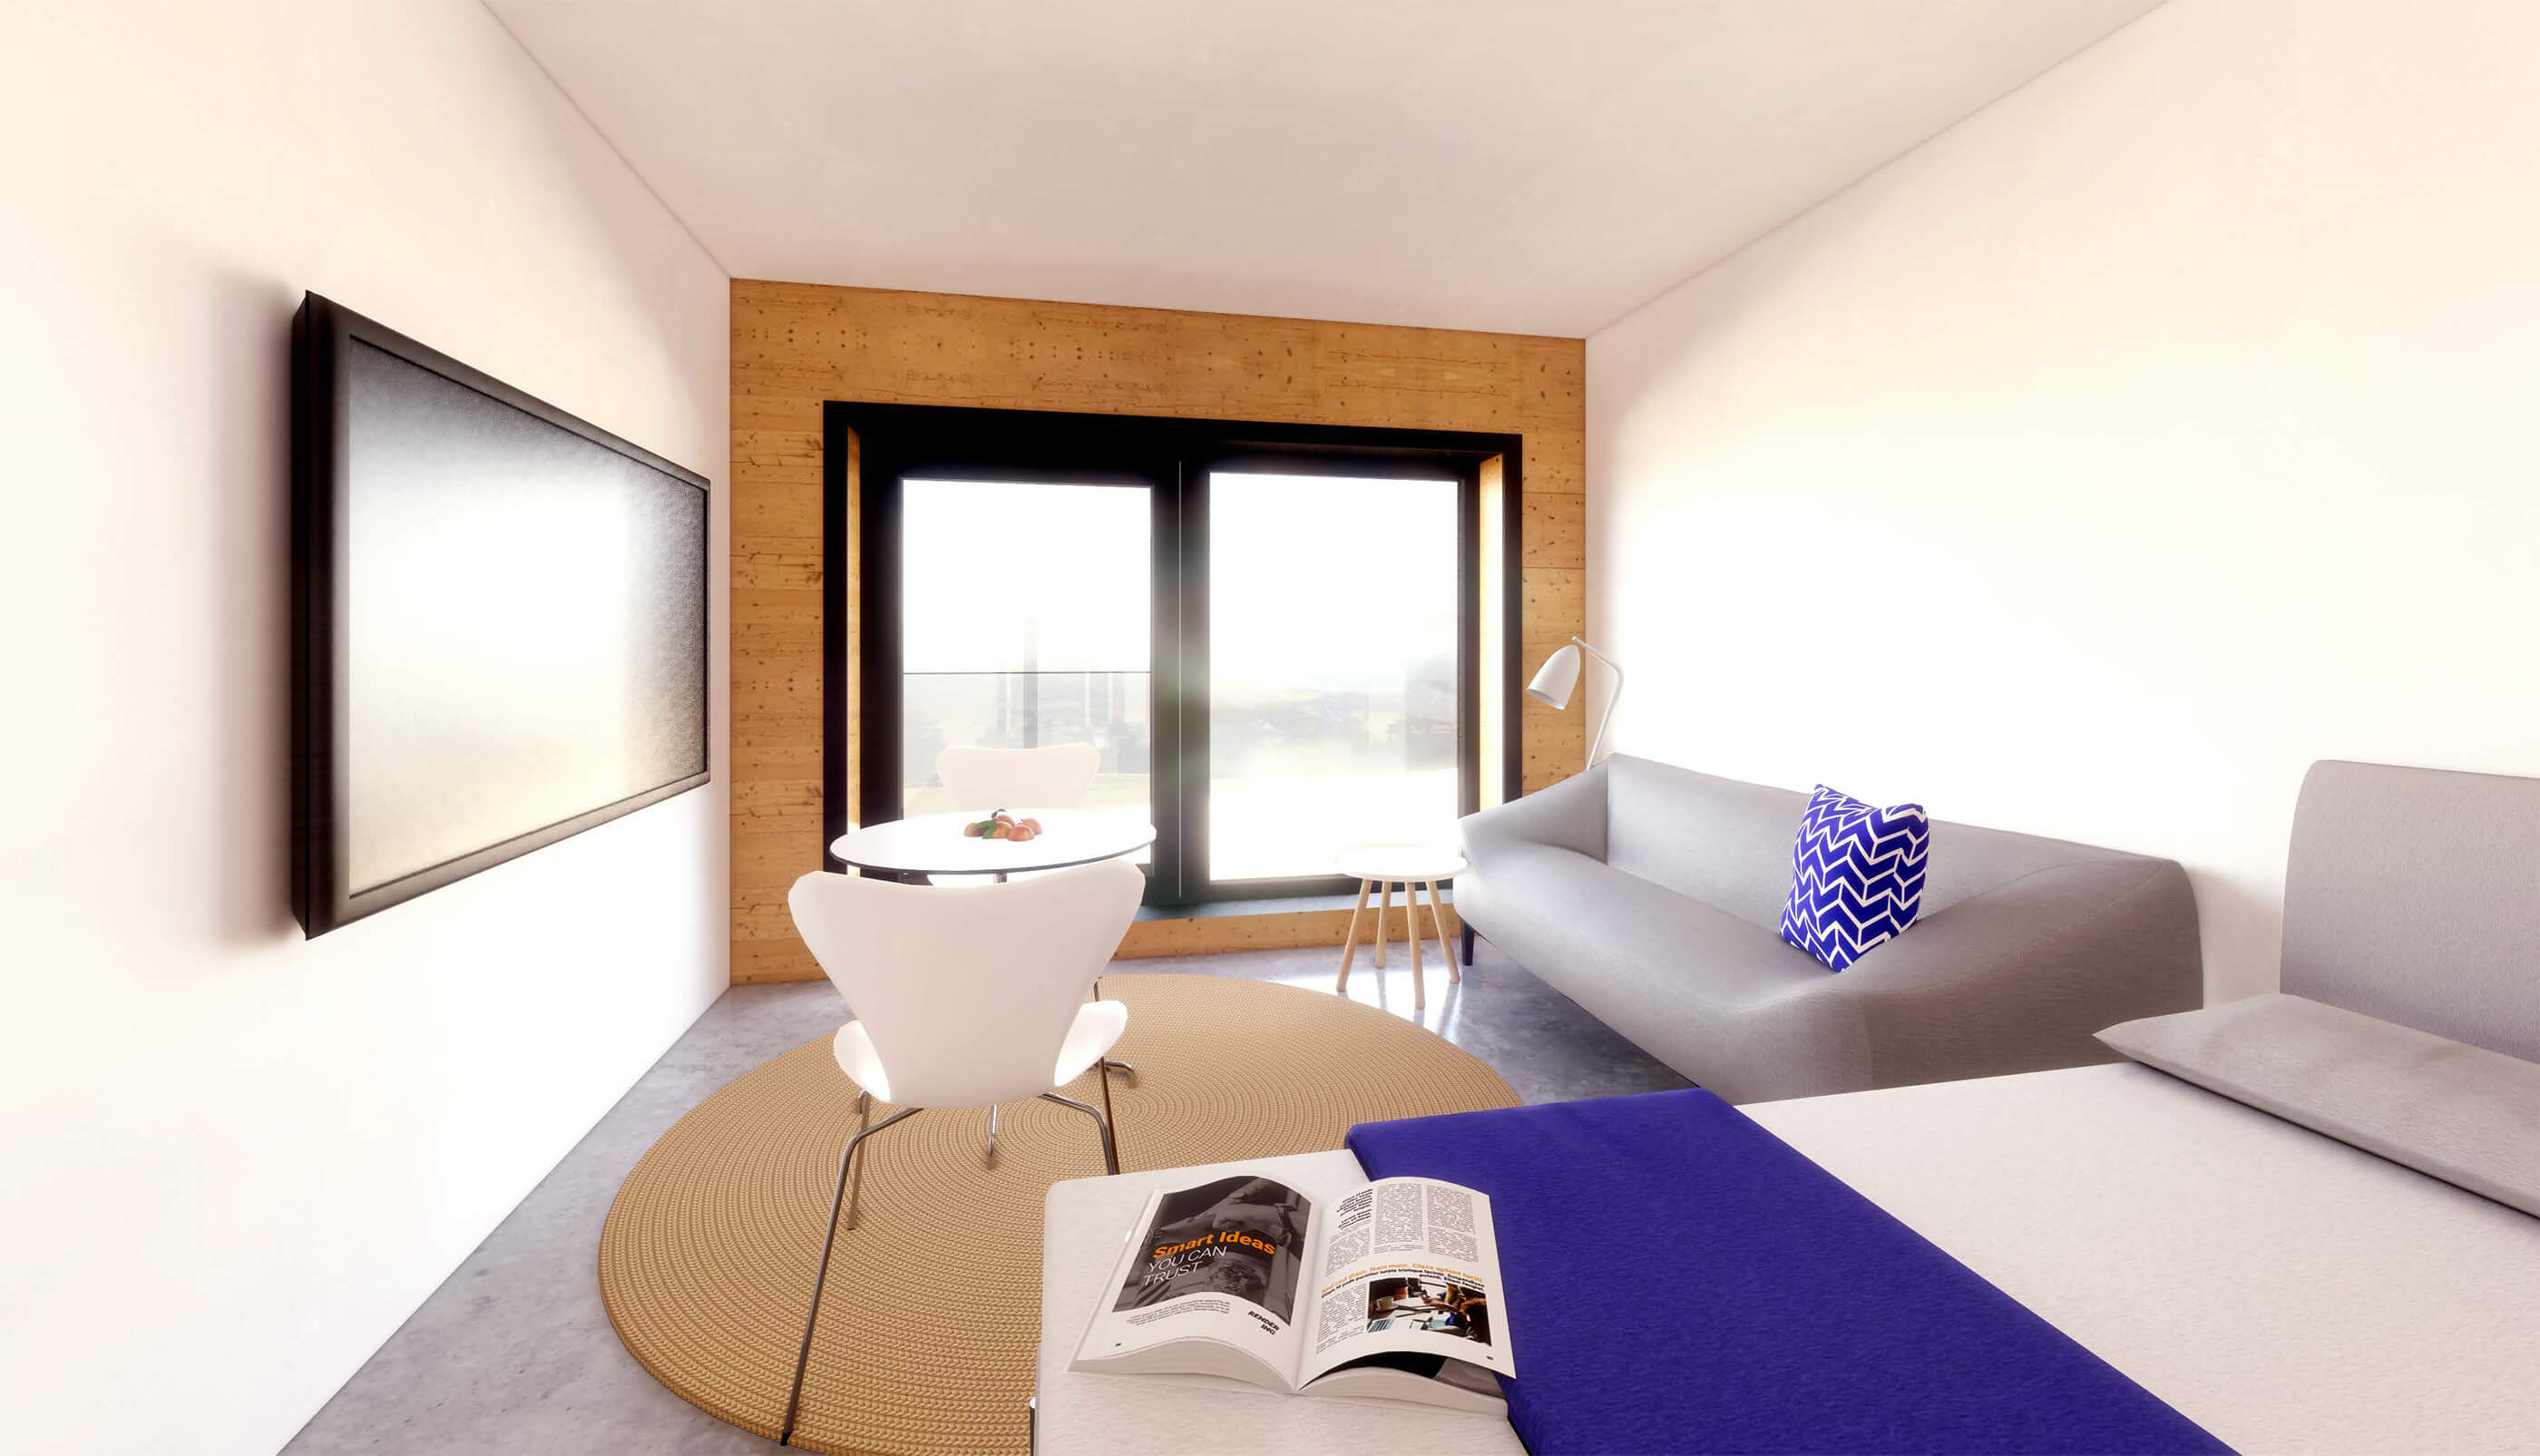 Interior rendering of long apartment unit with timber at the end